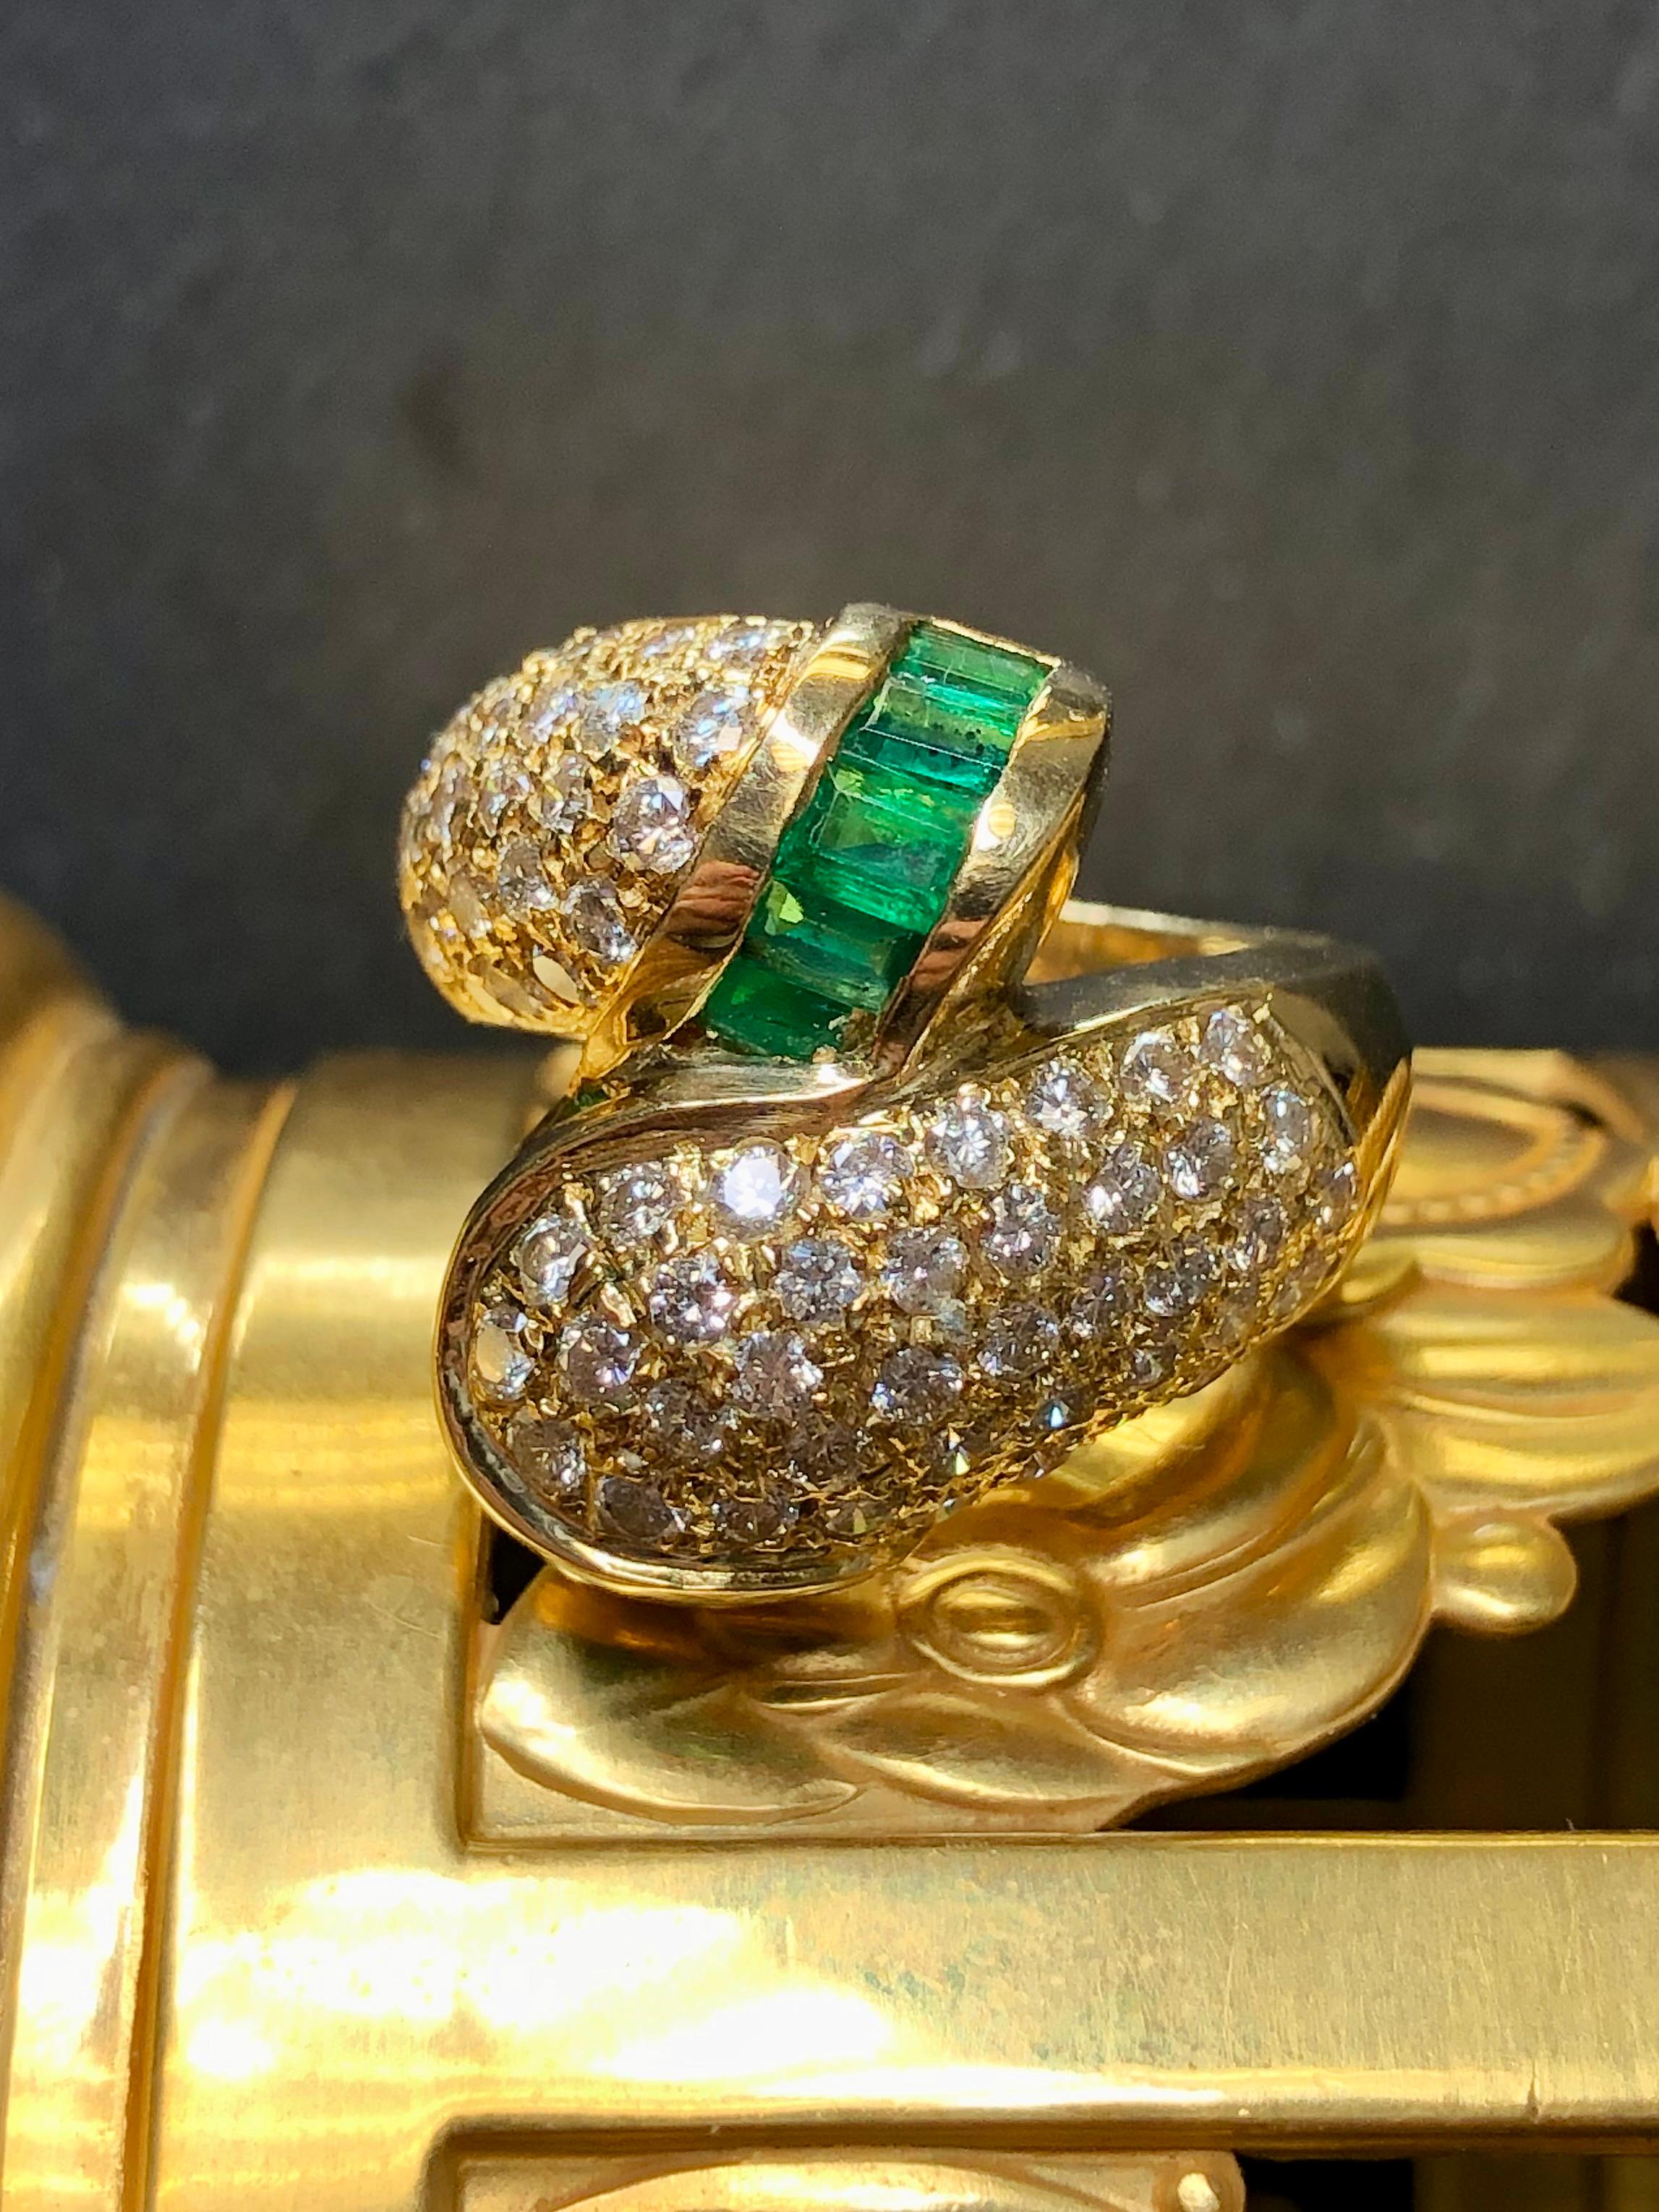 Contemporary Vintage 18K Emerald Pave Diamond Bypass Large Cocktail Ring 4.30cttw Sz 7.75 For Sale